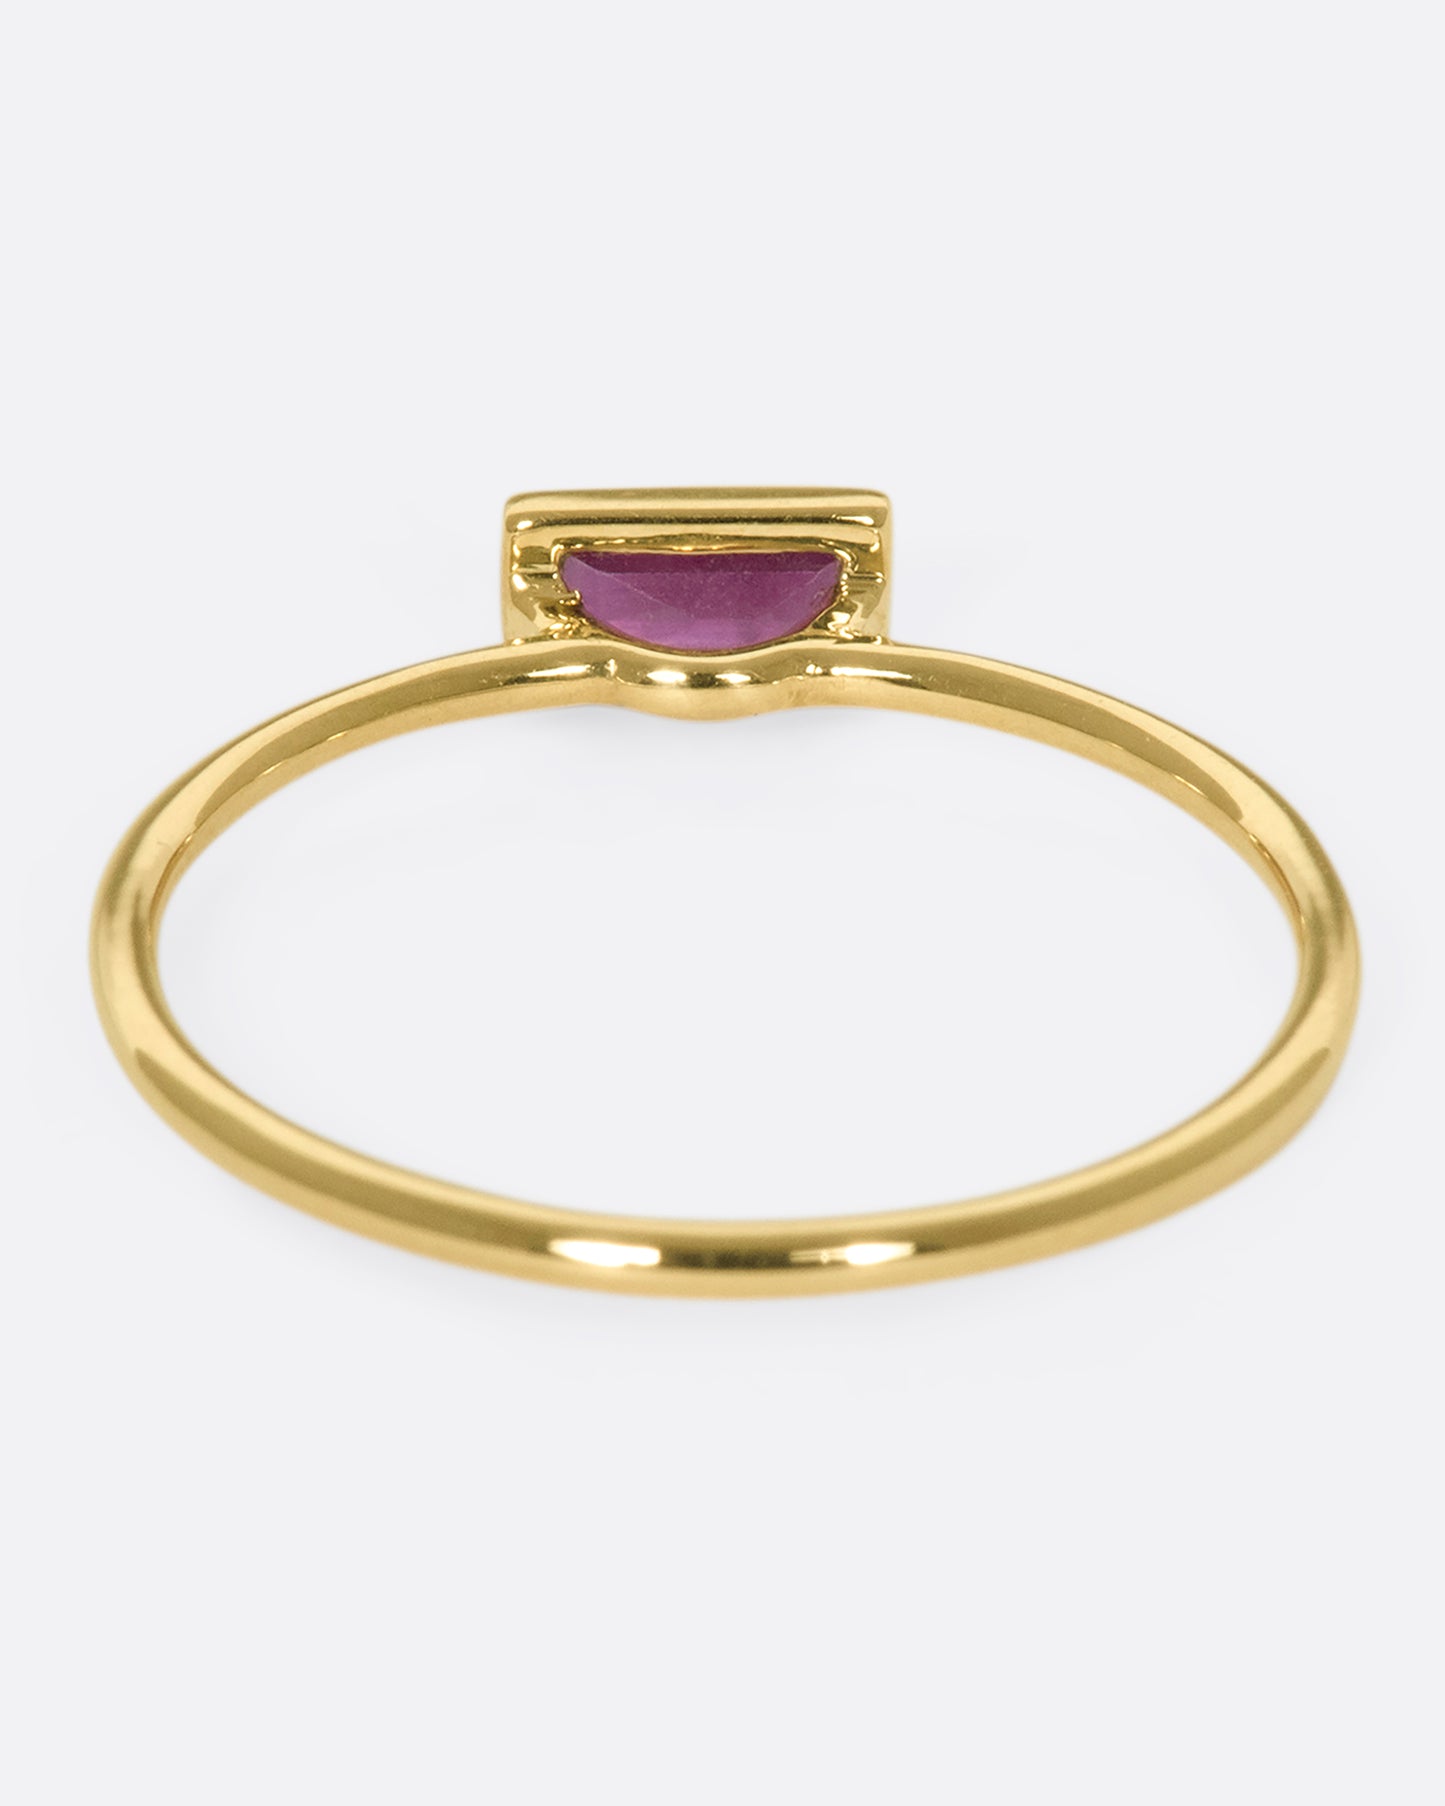 This horizontal ruby baguette set in 9k gold is a stunning stacker, adding color, sparkle, and dimensional interest without bringing any bulk.